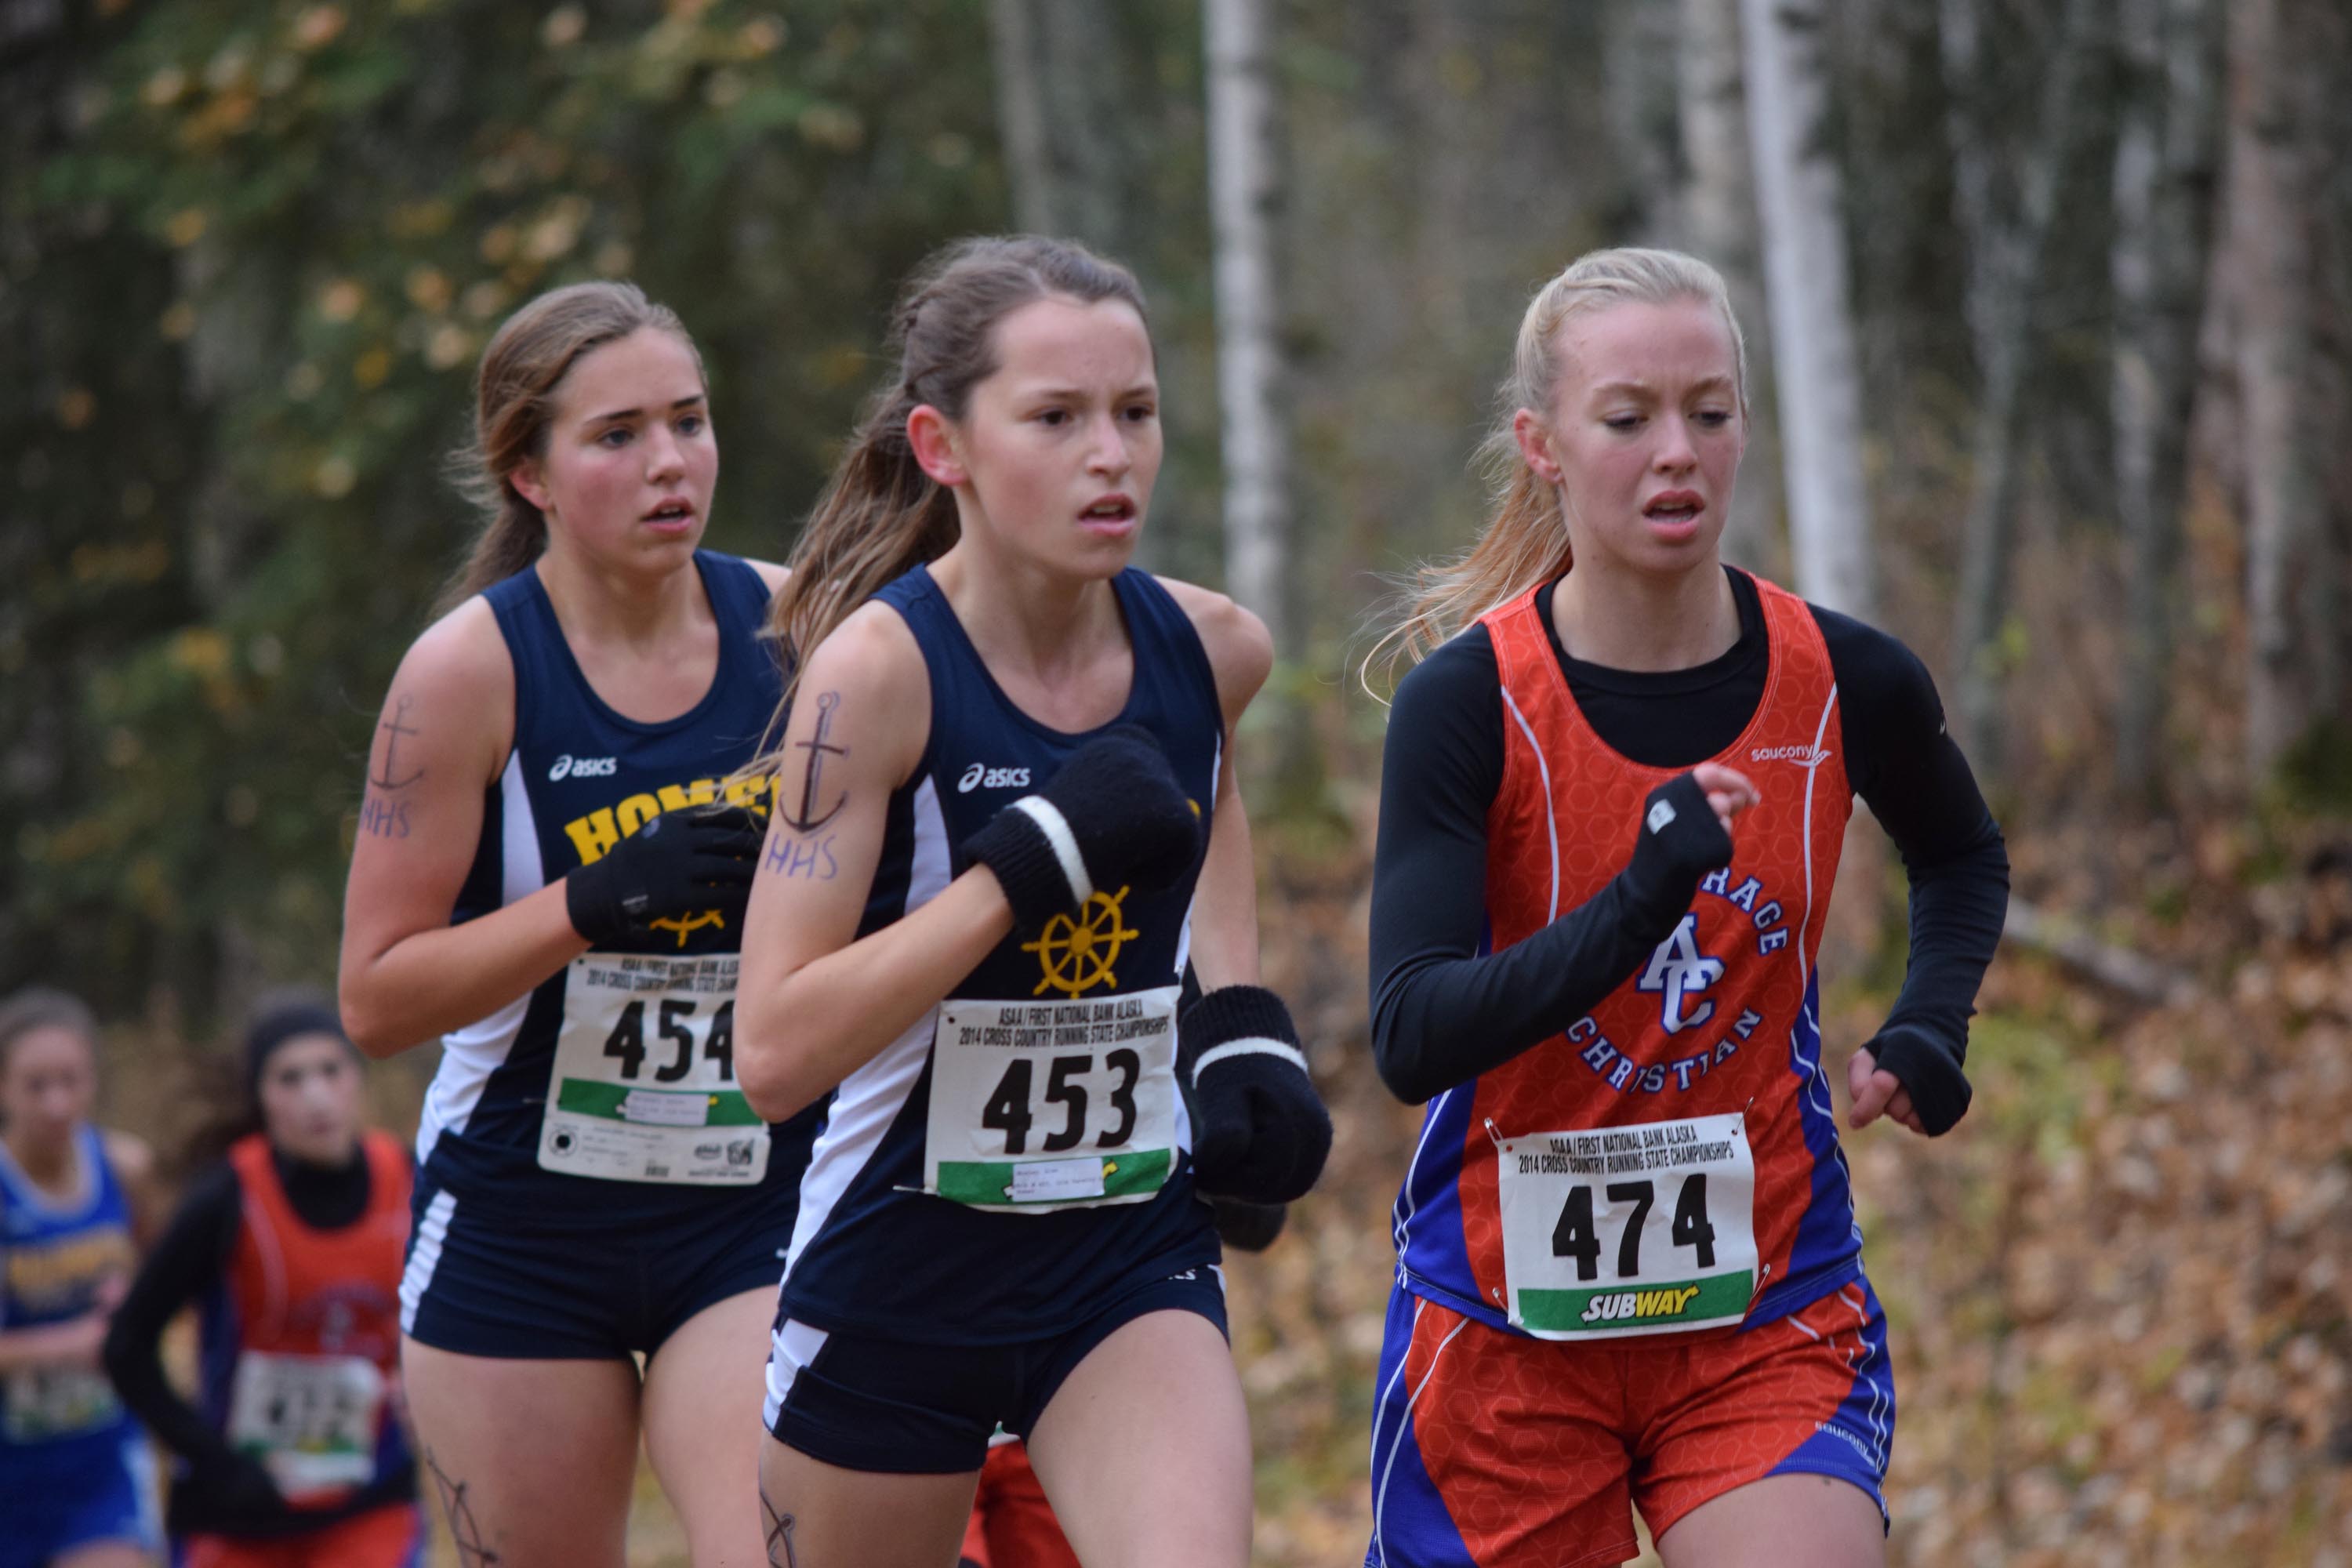 Finish times of Mariners Aurora Waclawski, 454, Alex Hosley, 453, running next to ACS’s Elizabeth Balsan, 474, help secure Homer’s girls varsity cross-country team state championship in Anchorage on Oct. 4. -Photo by Jim Wolfe